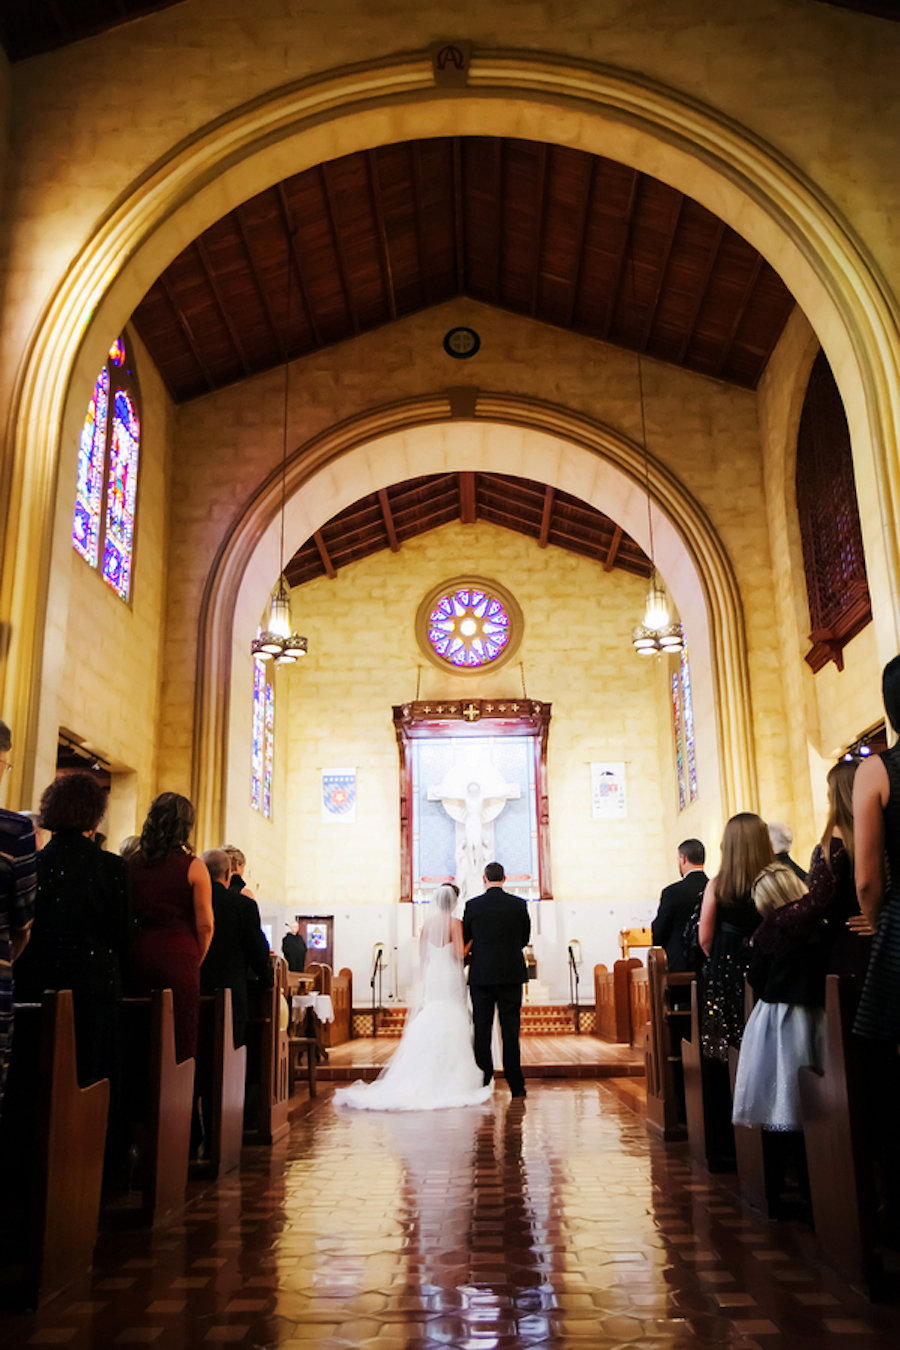 Bride and Groom at Church Altar During Wedding Ceremony| St. Leo Abbey Church Tampa Bay Wedding Venue| Photo by Tampa Bay Wedding Photographer Limelight Photography